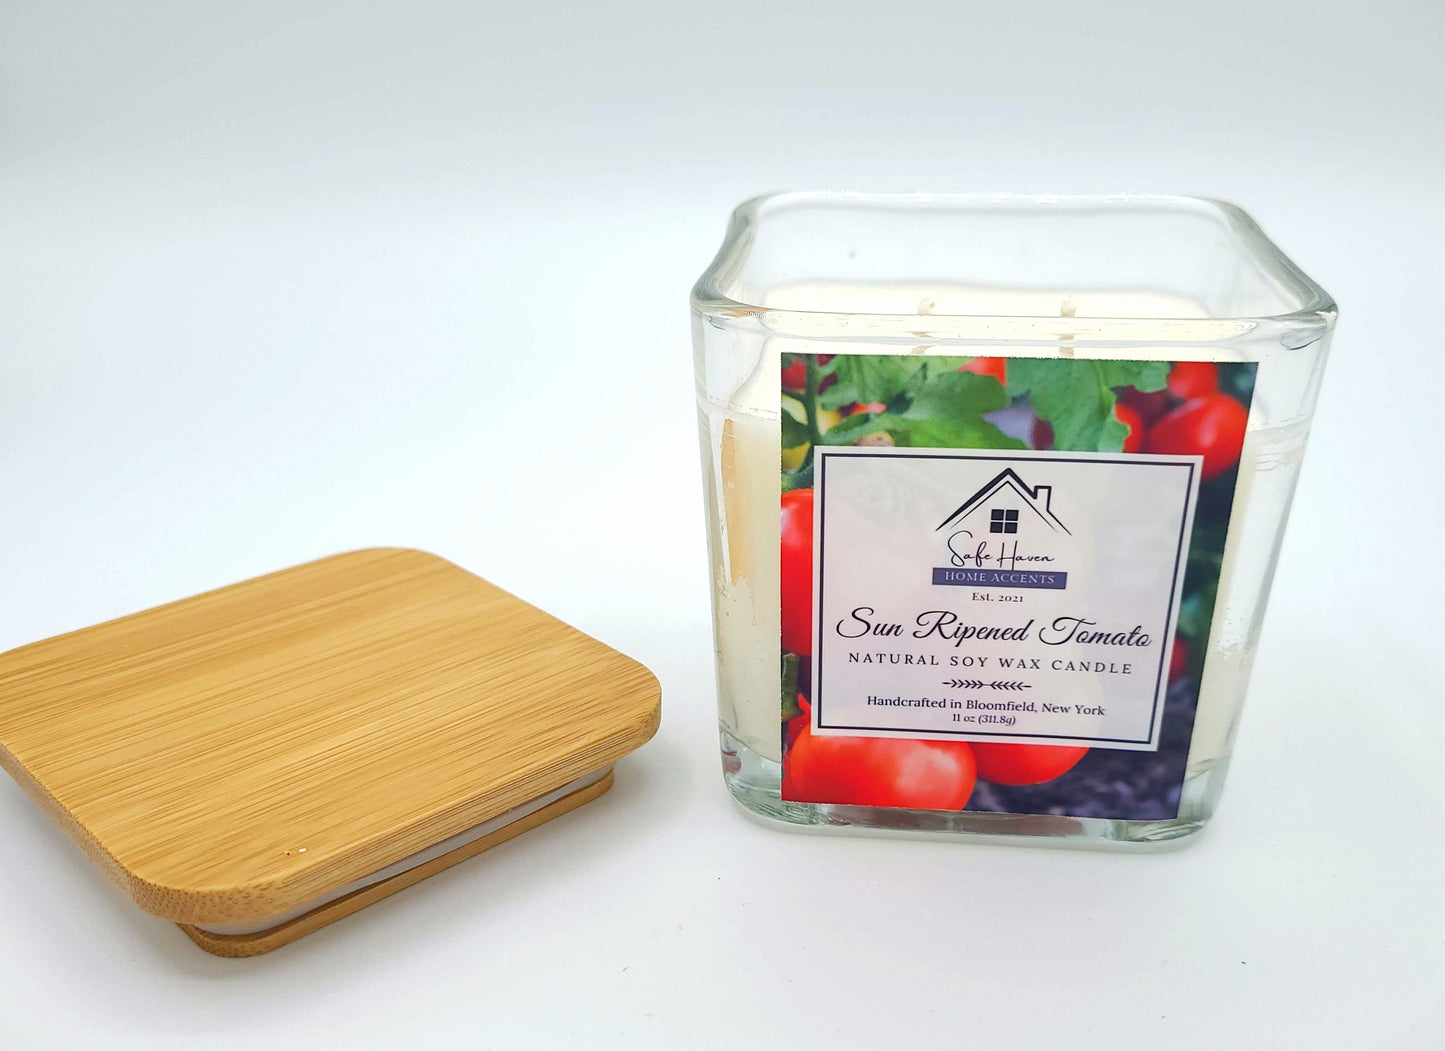 Sun Ripened Tomato Natural Soy Wax Candle